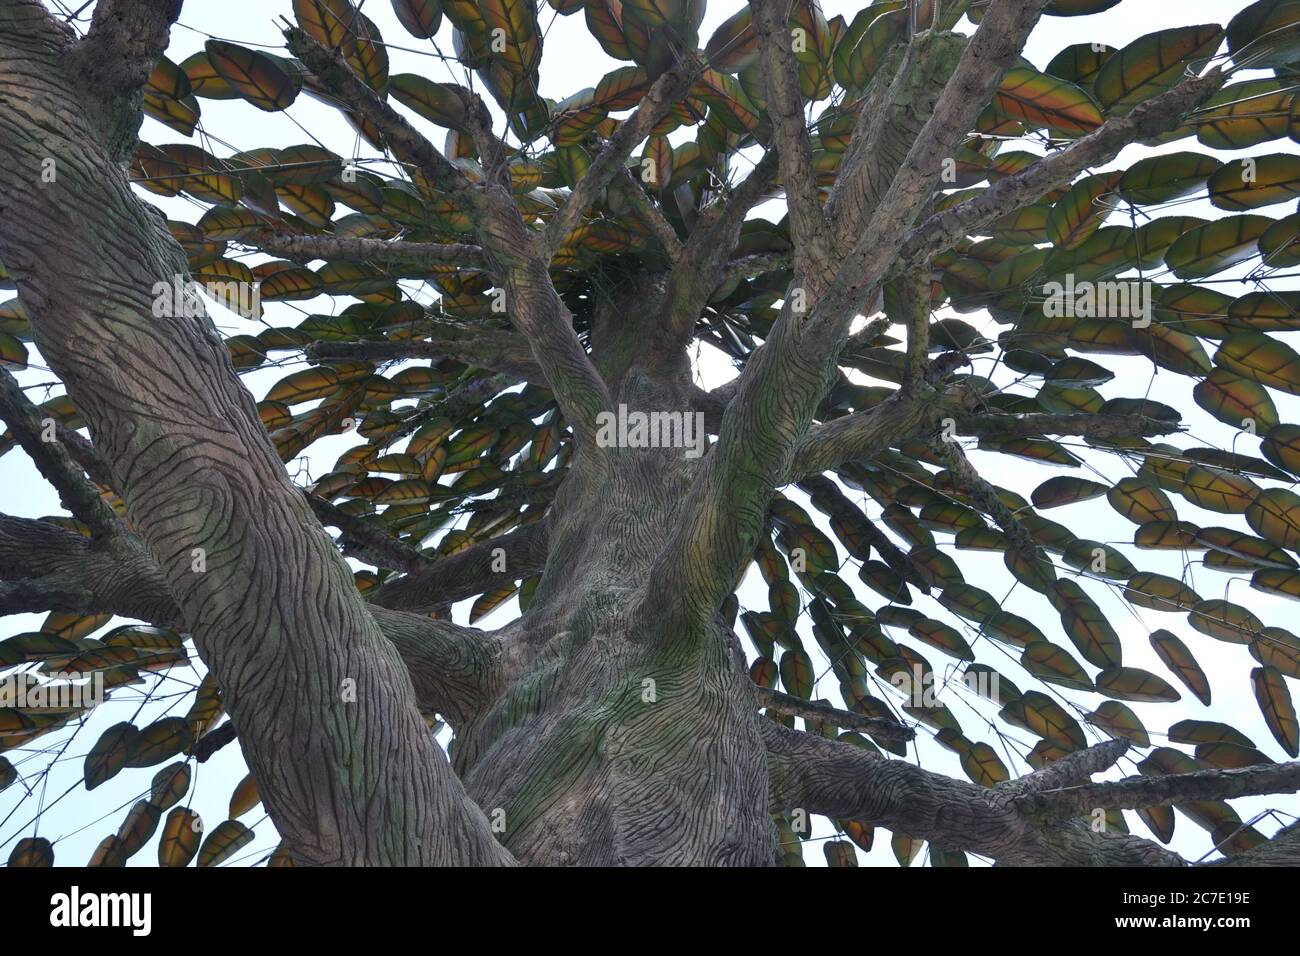 Handmade iron and steel tree, with a bottom-up view, showing iron and steel trunks, branches and leaves, on an Ecotourism farm, Brazil, South America Stock Photo